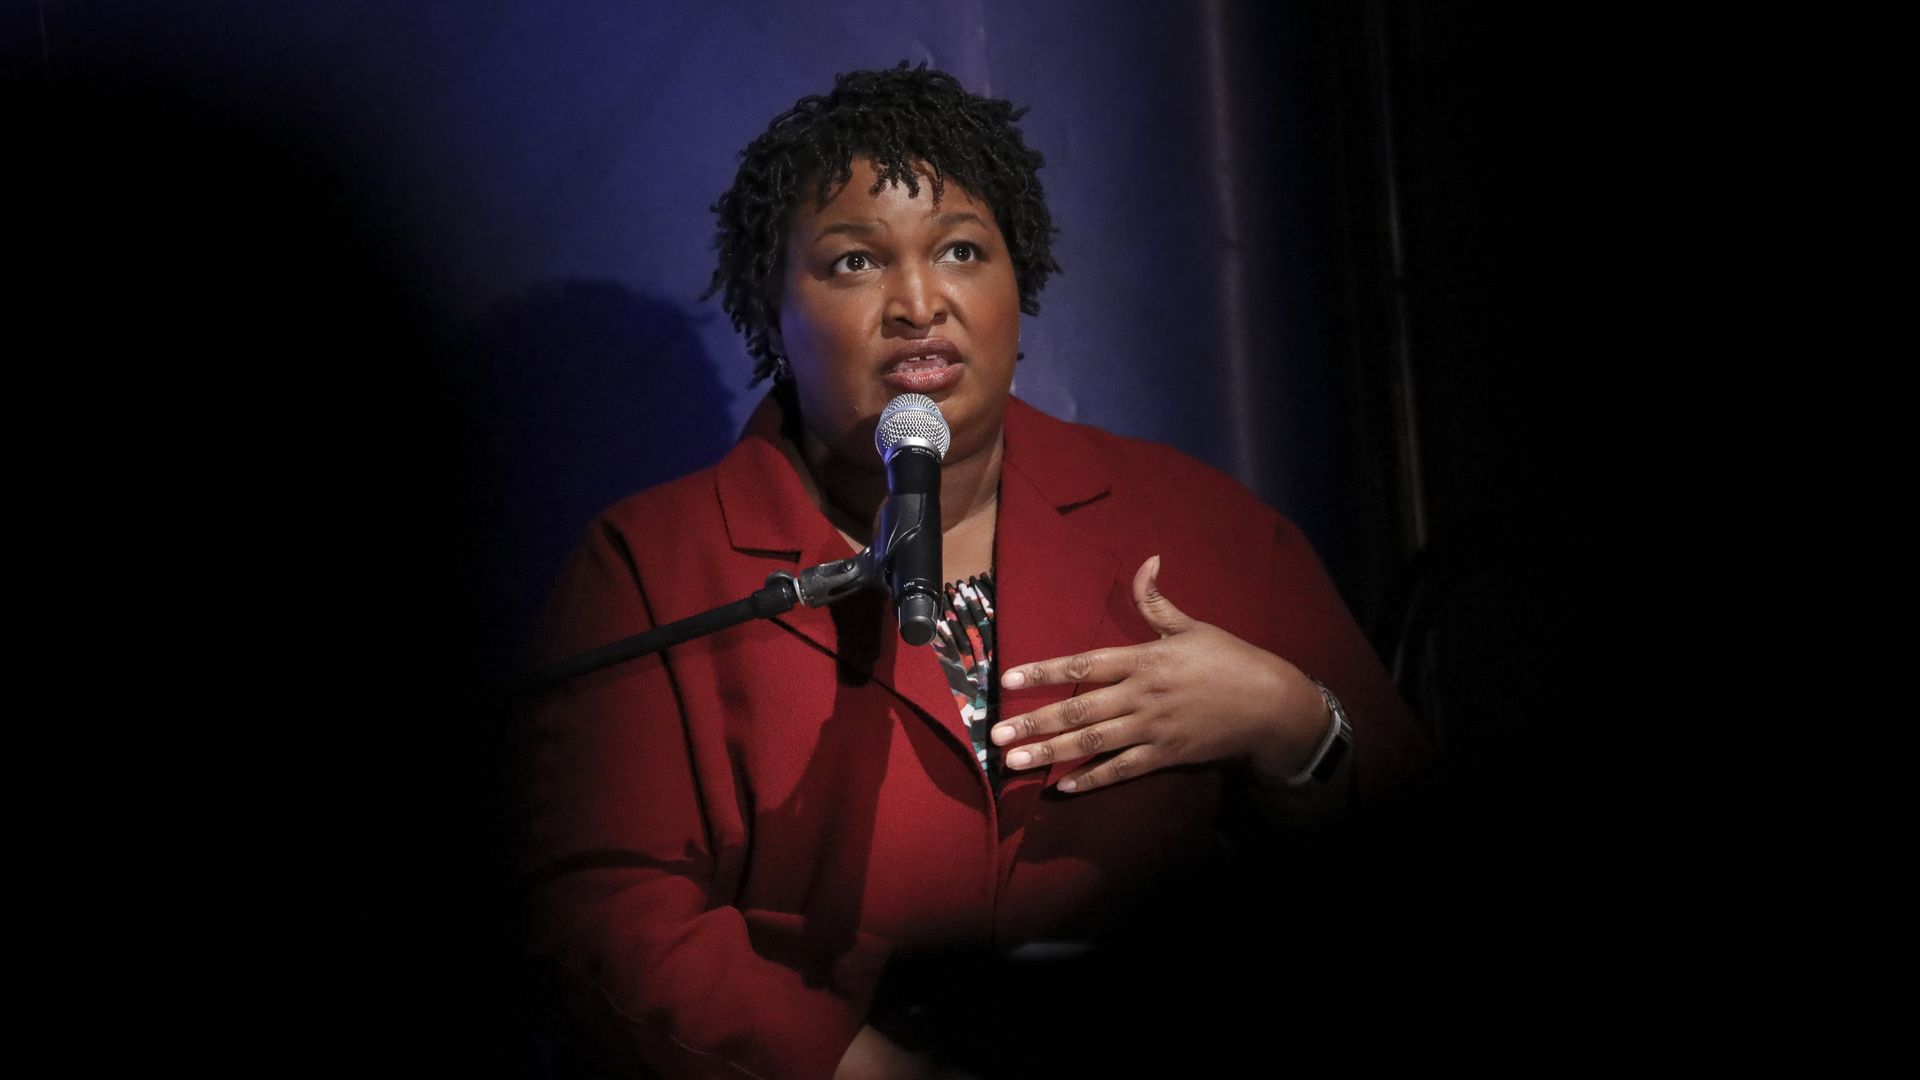 In this image, Abrams speaks into a microphone with one hand gesturing towards herself. 